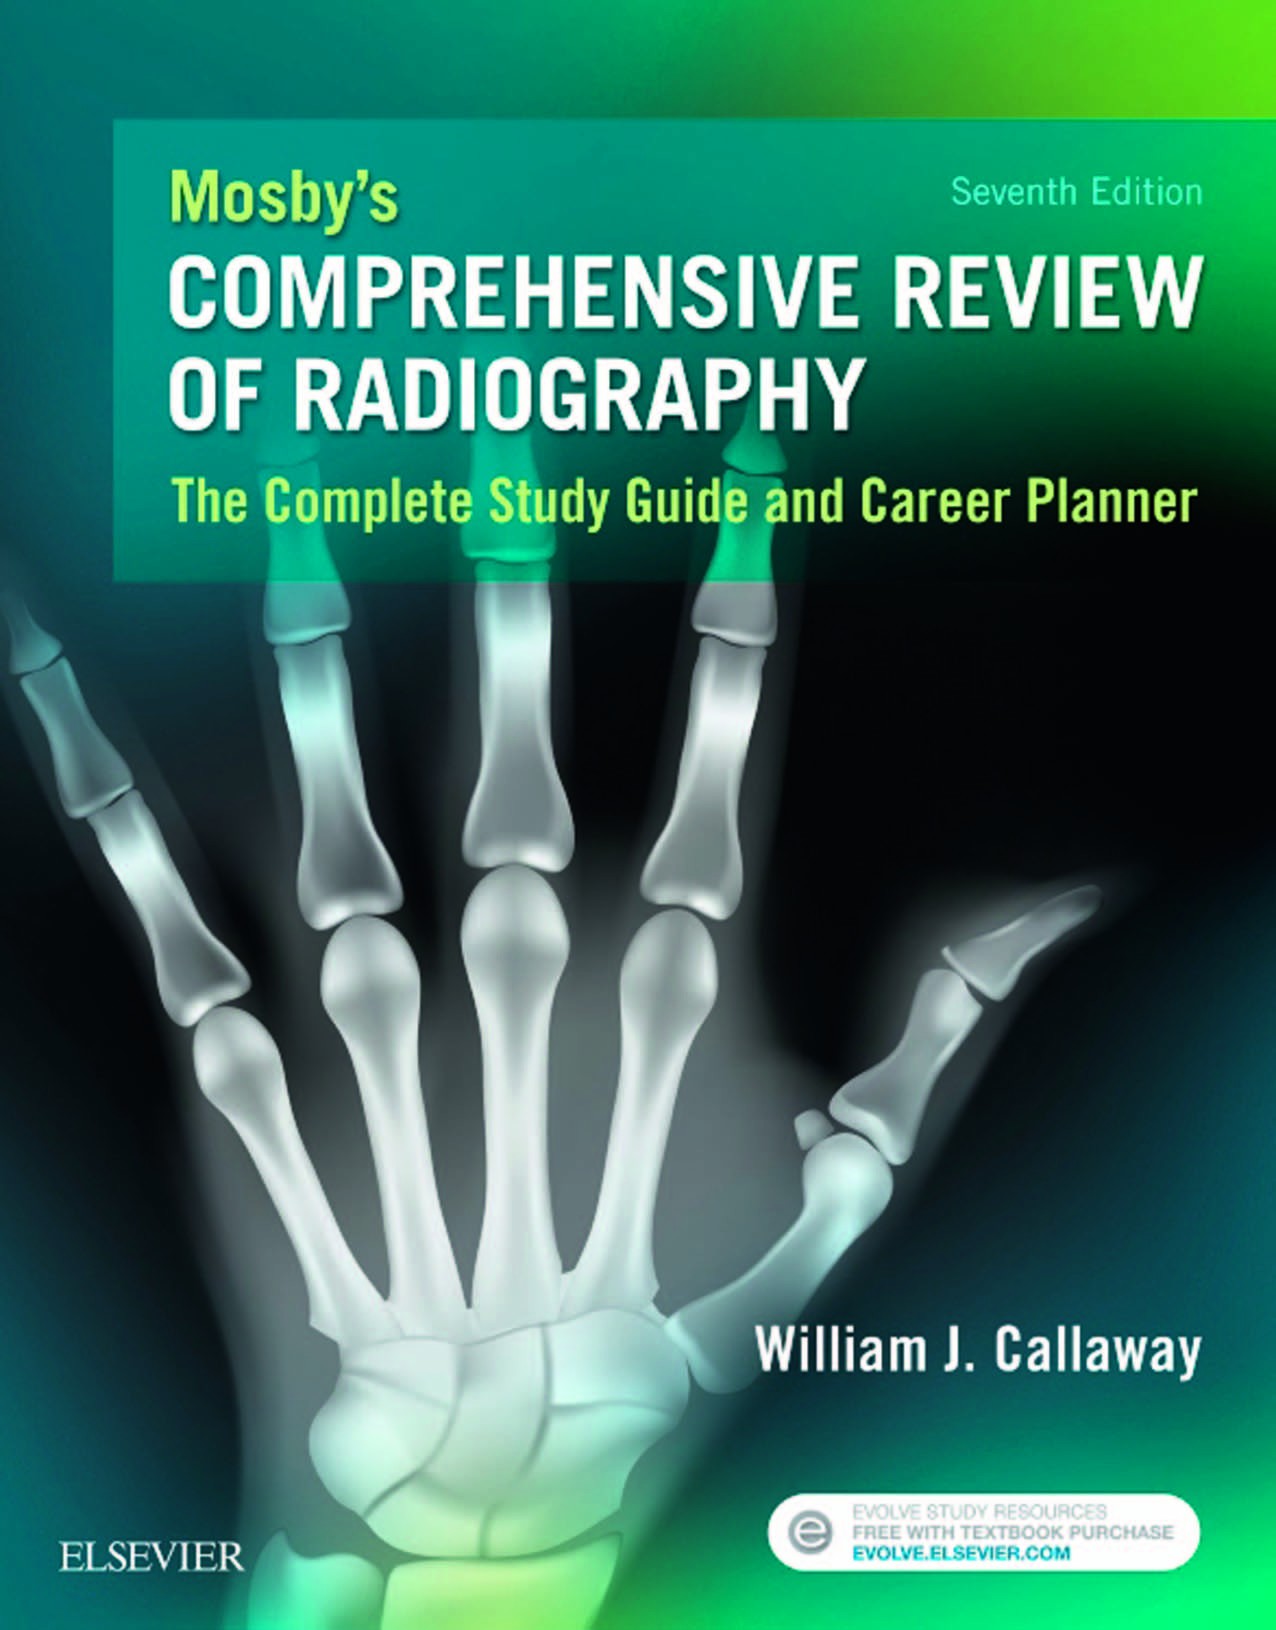 Mosbys - Comprehensive Review of Radiography, 7th ed